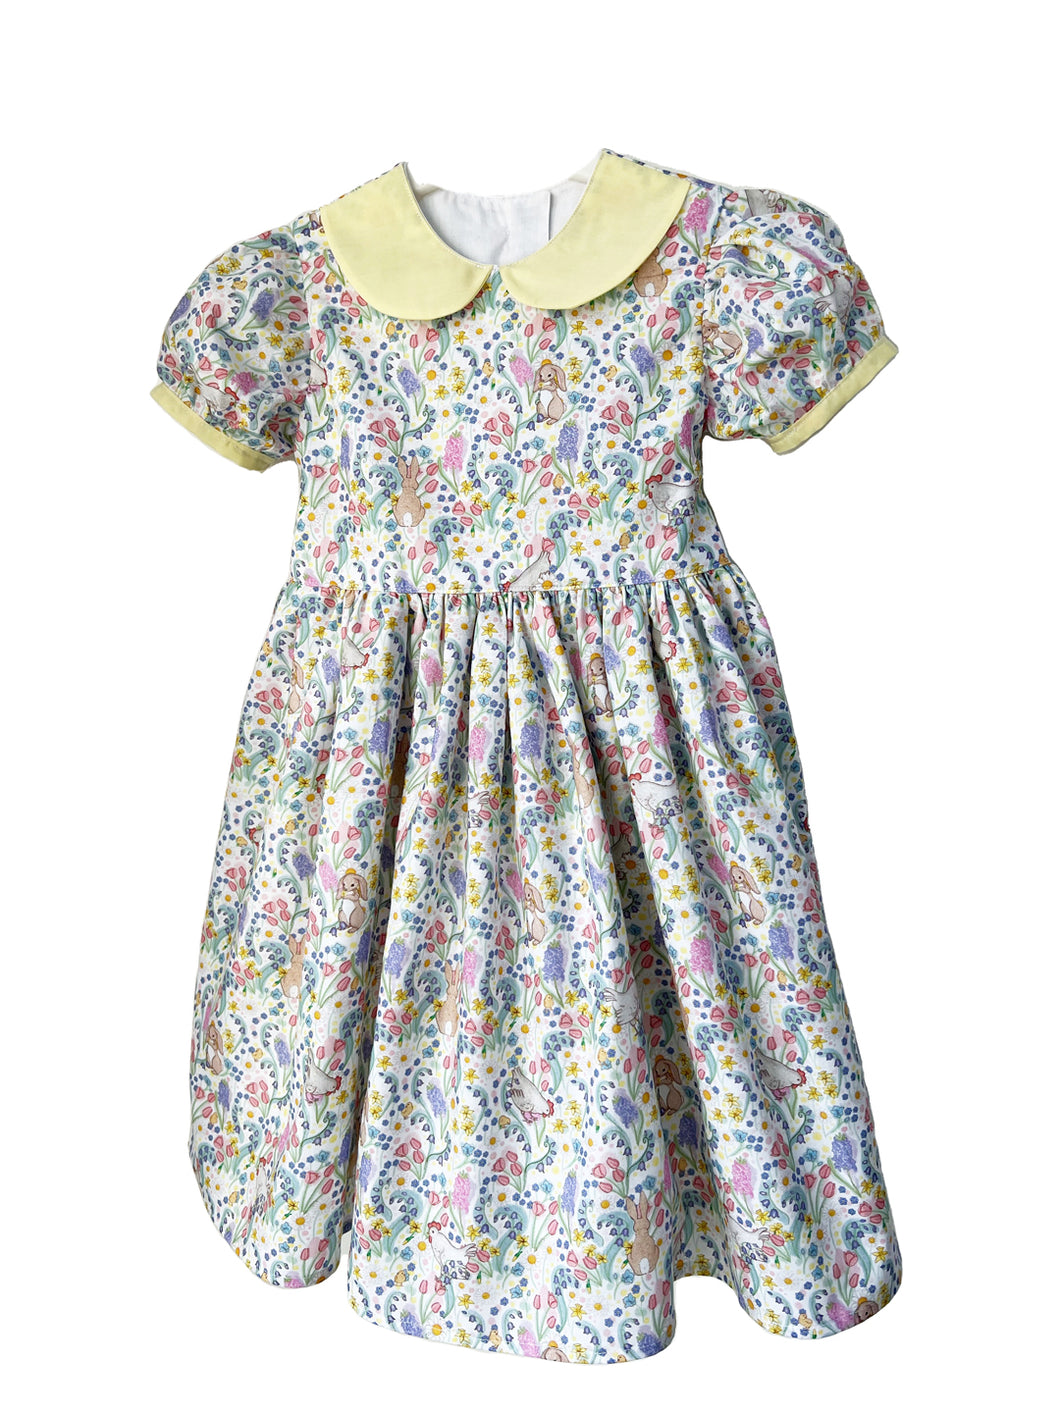 Made to Order Child's Party Dress Sizes 18m-10y